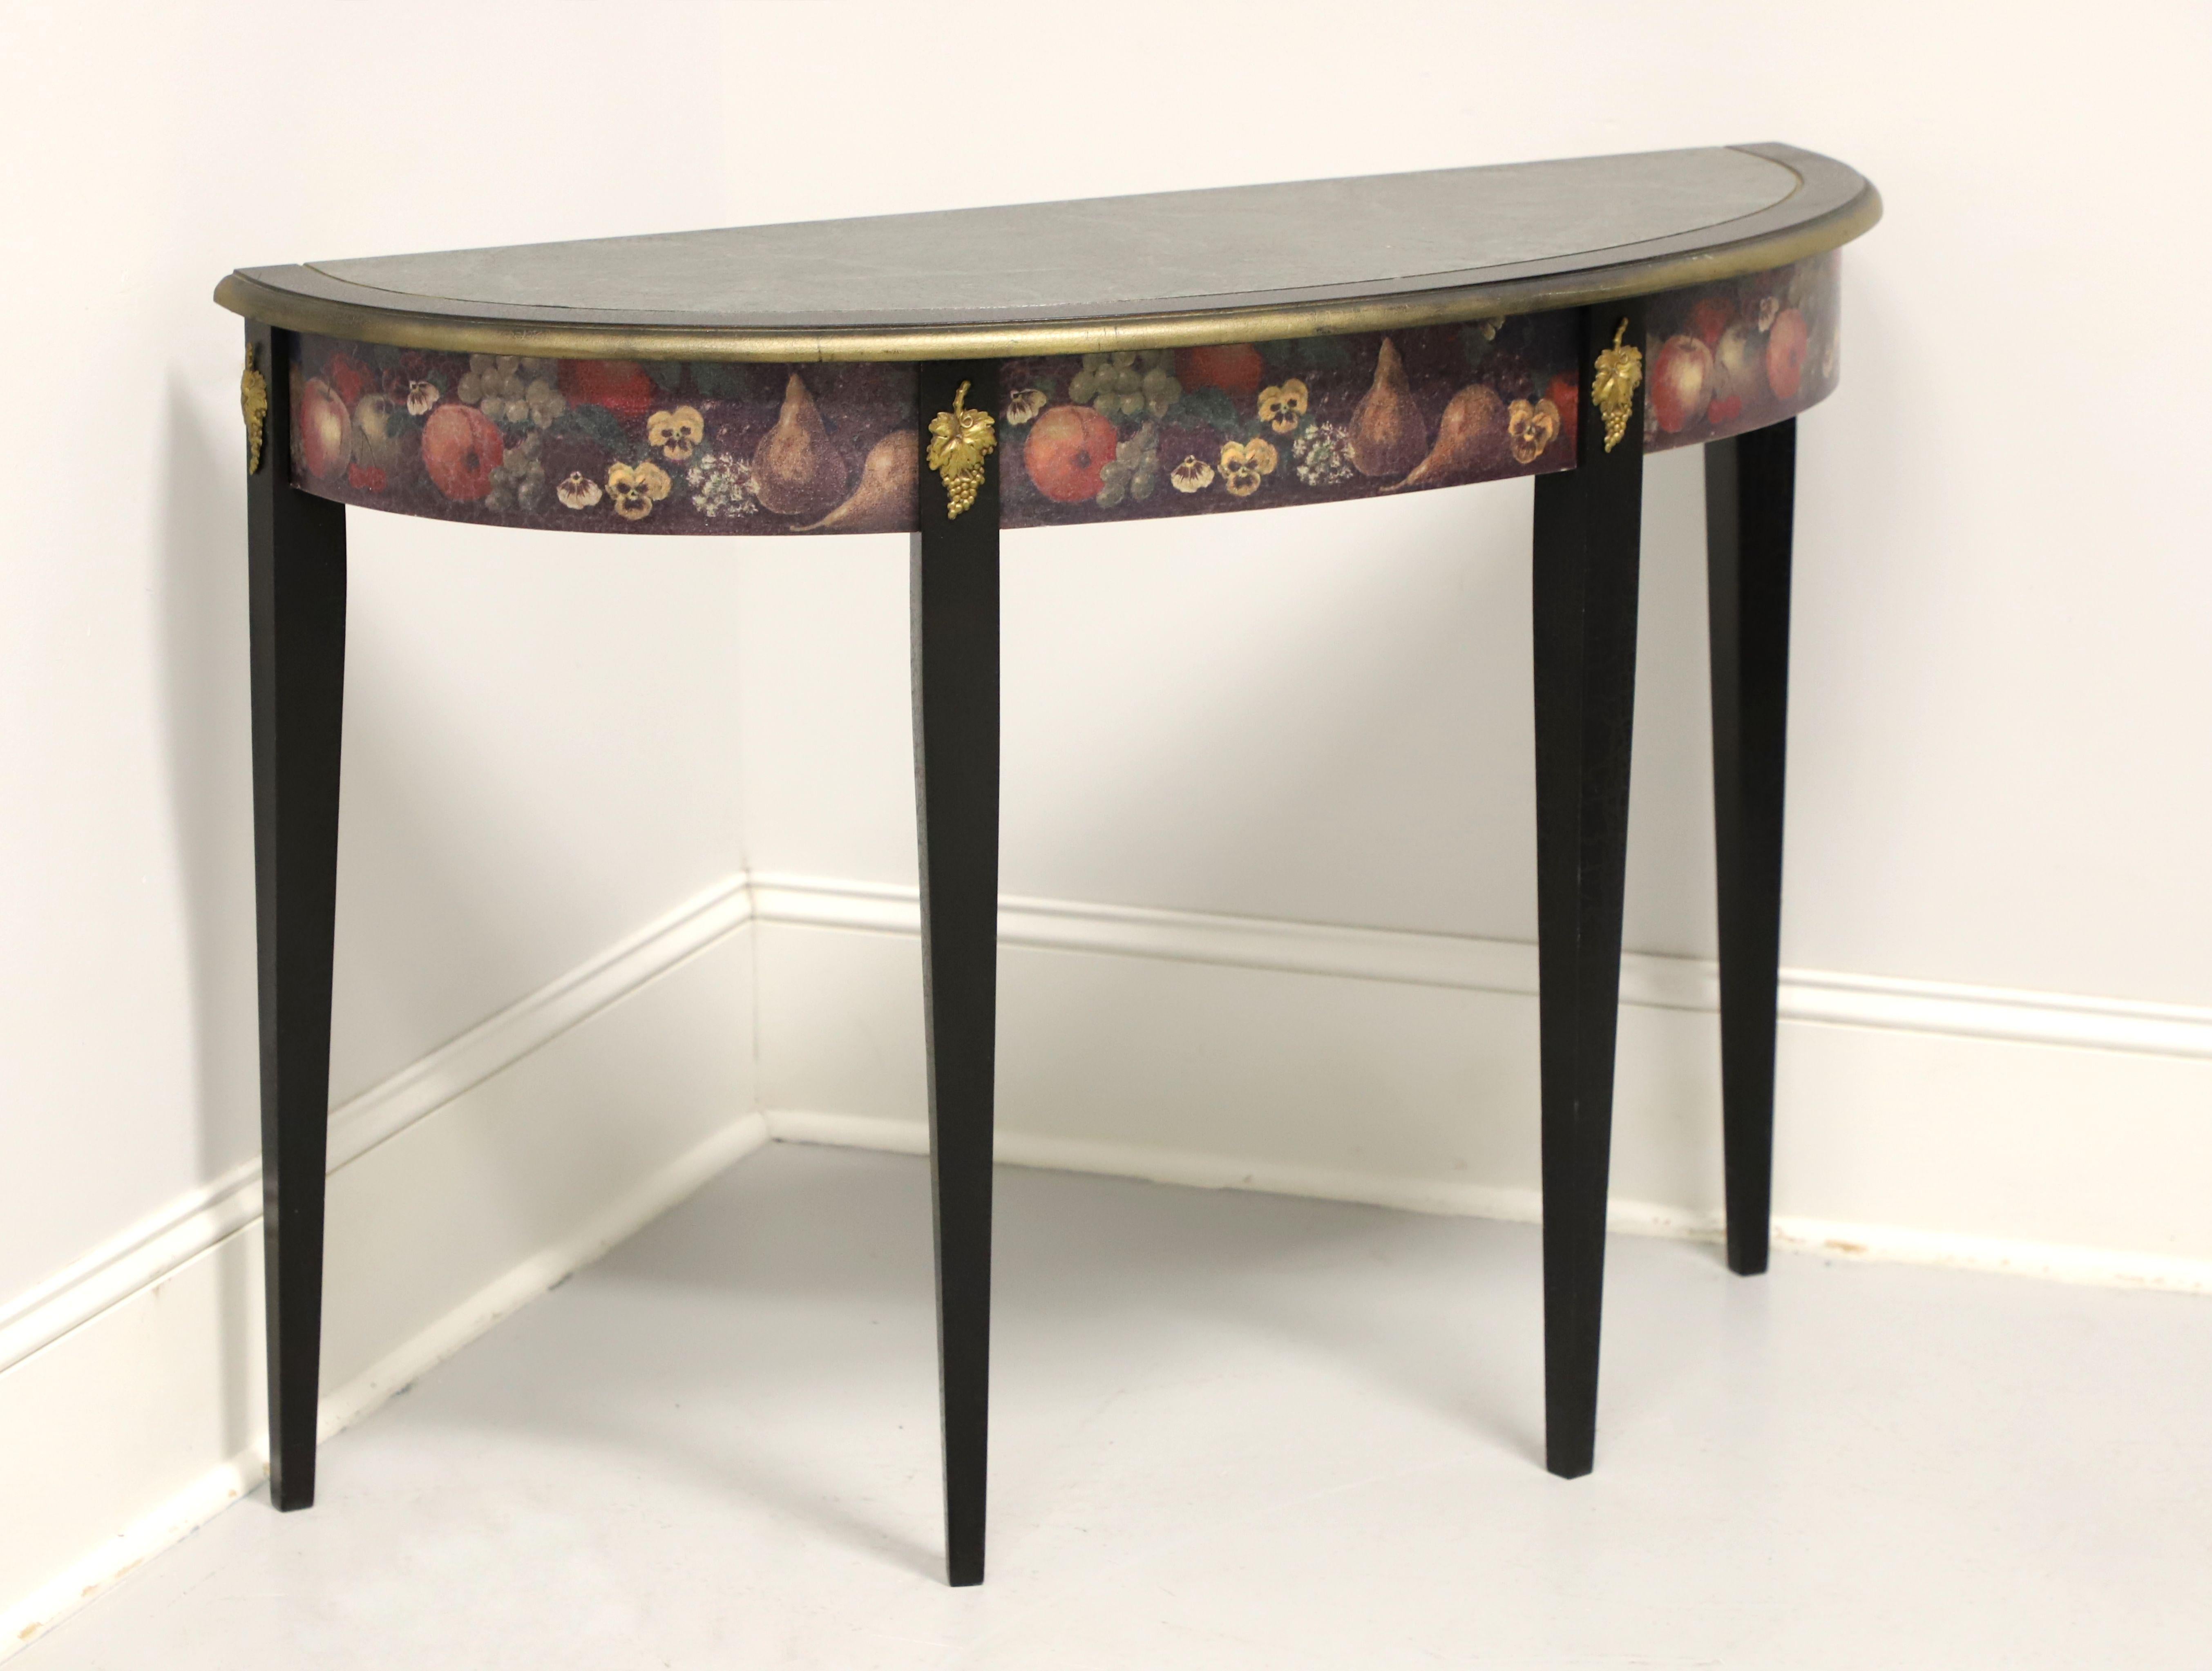 A Hepplewhite style demilune console table, unbranded, similar quality to Maitland Smith. Solid wood frame, painted faux marble banded top with bullnose edge, floral motif painted to apron, gold grapes accents to top of legs at apron, and tapered